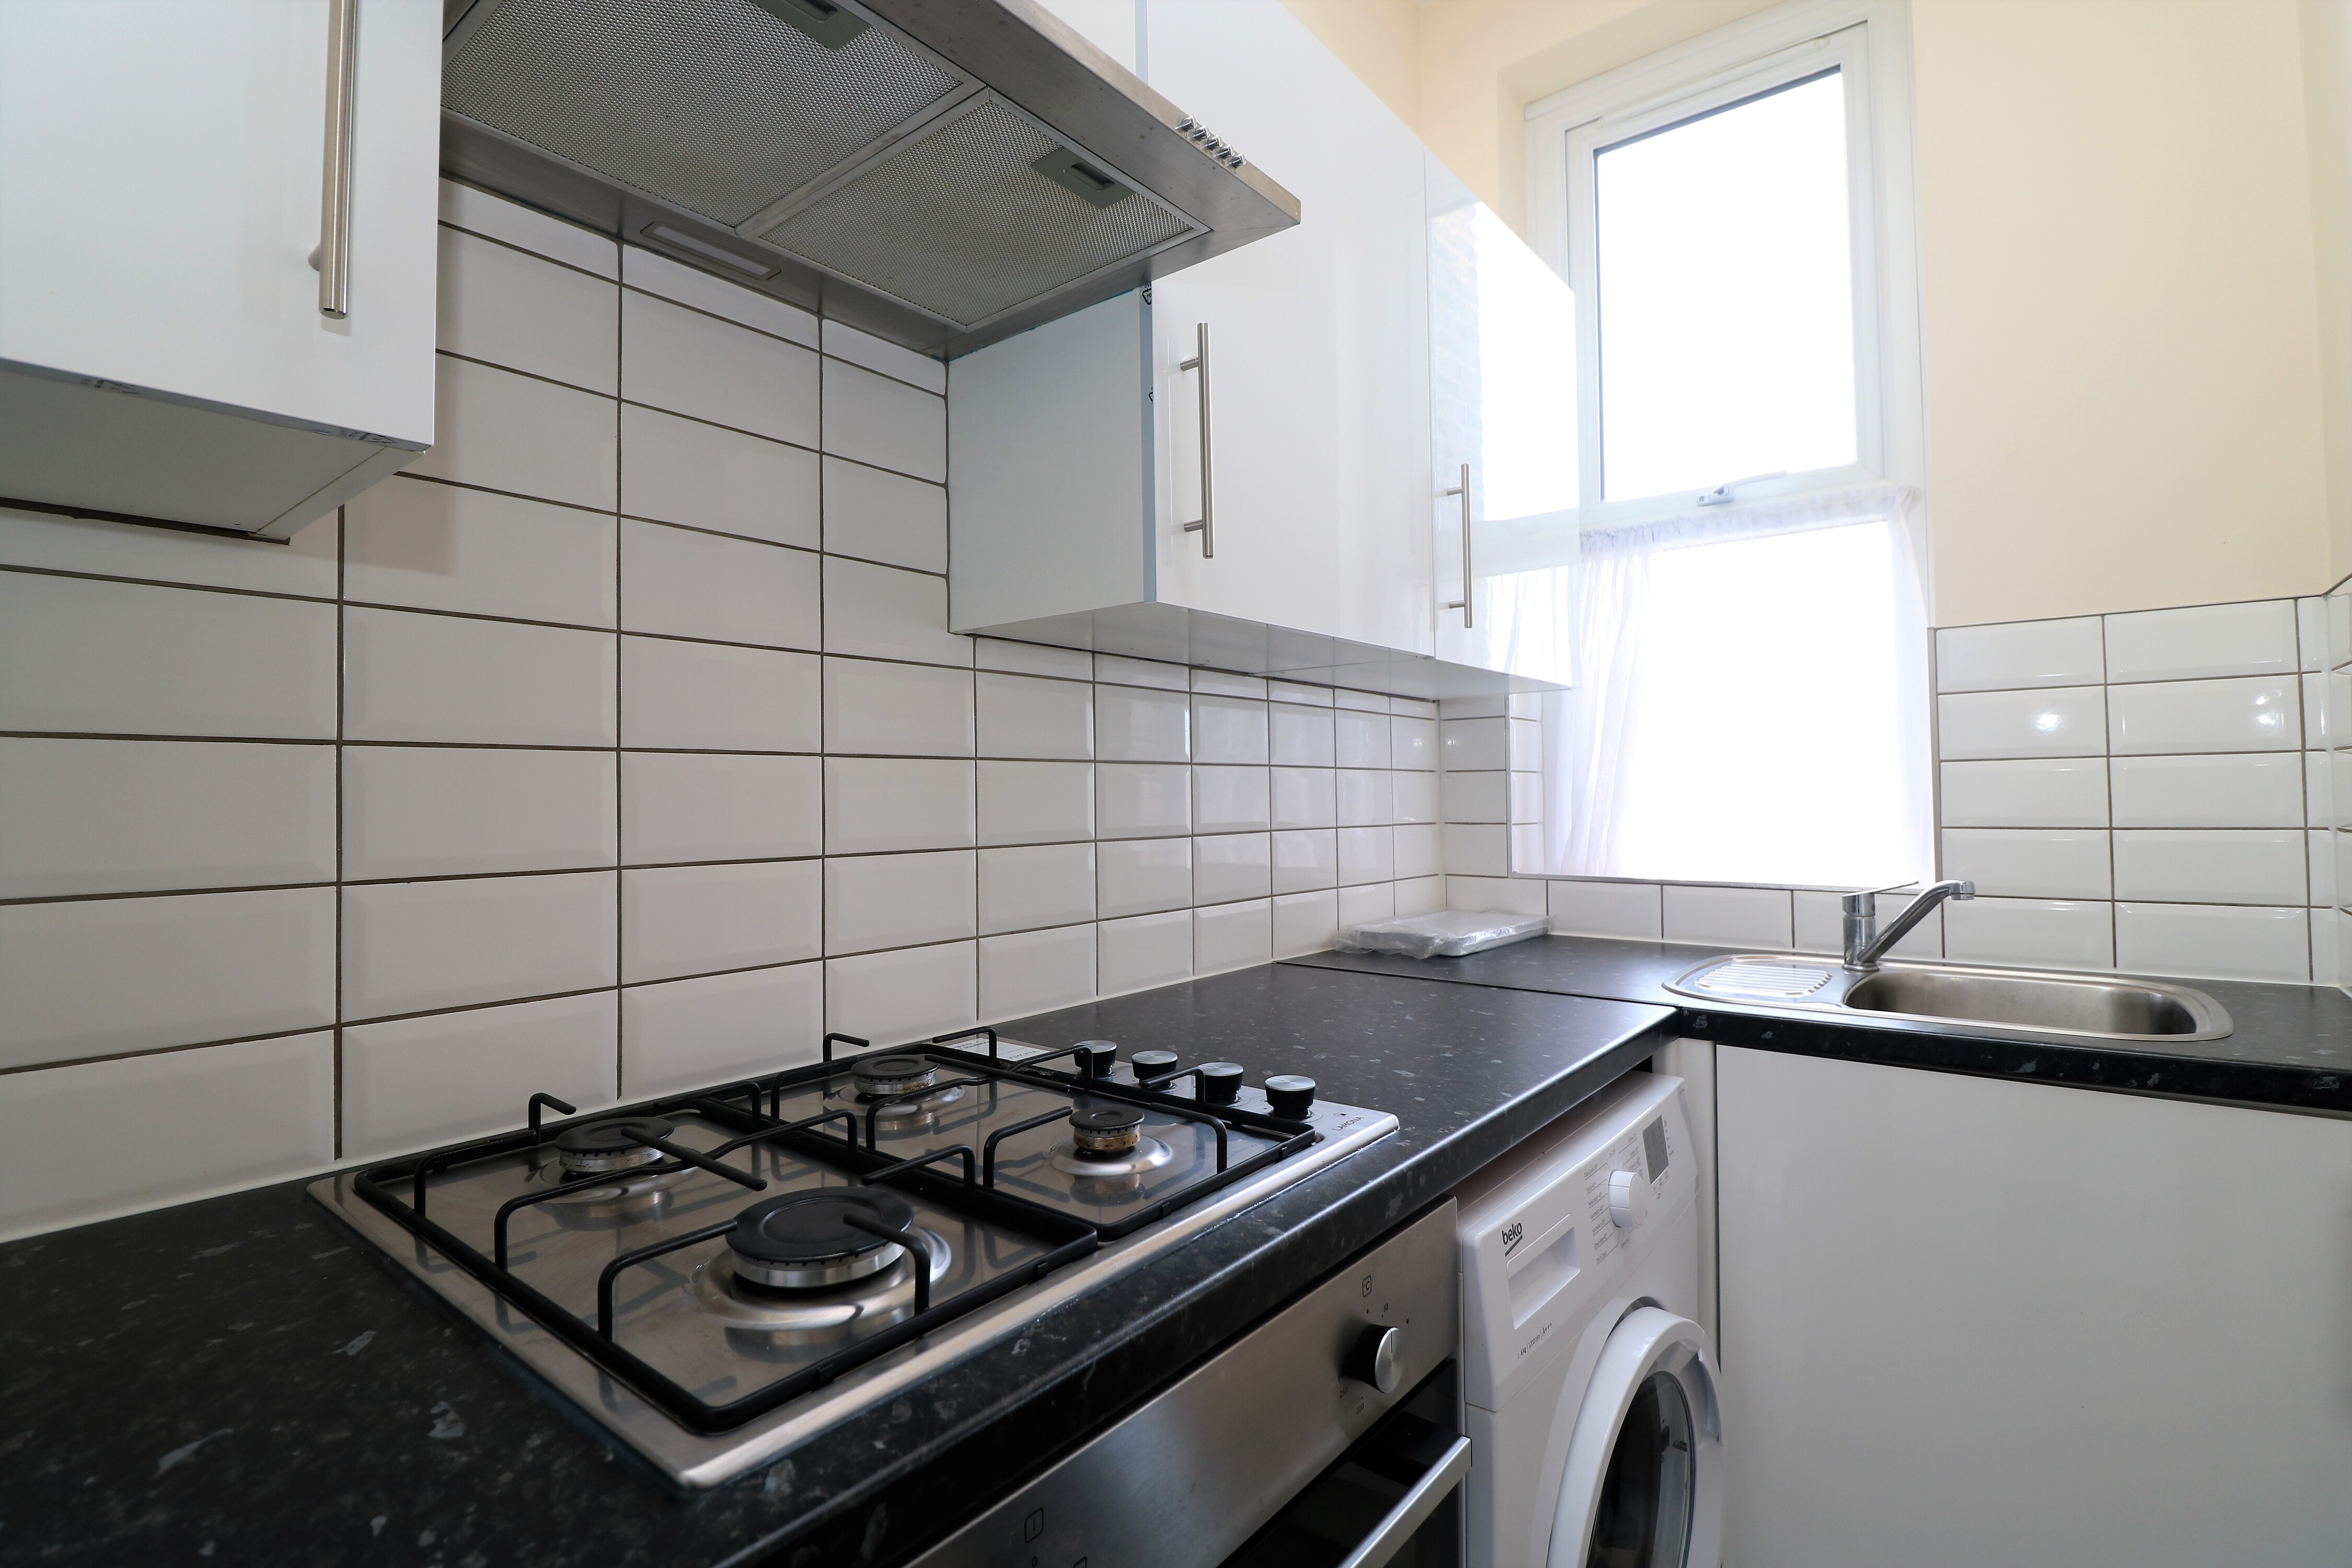 Spacious second floor one bedroom flat in a beautiful period property and recently refurbished with new Kitchen and bathroom, N17